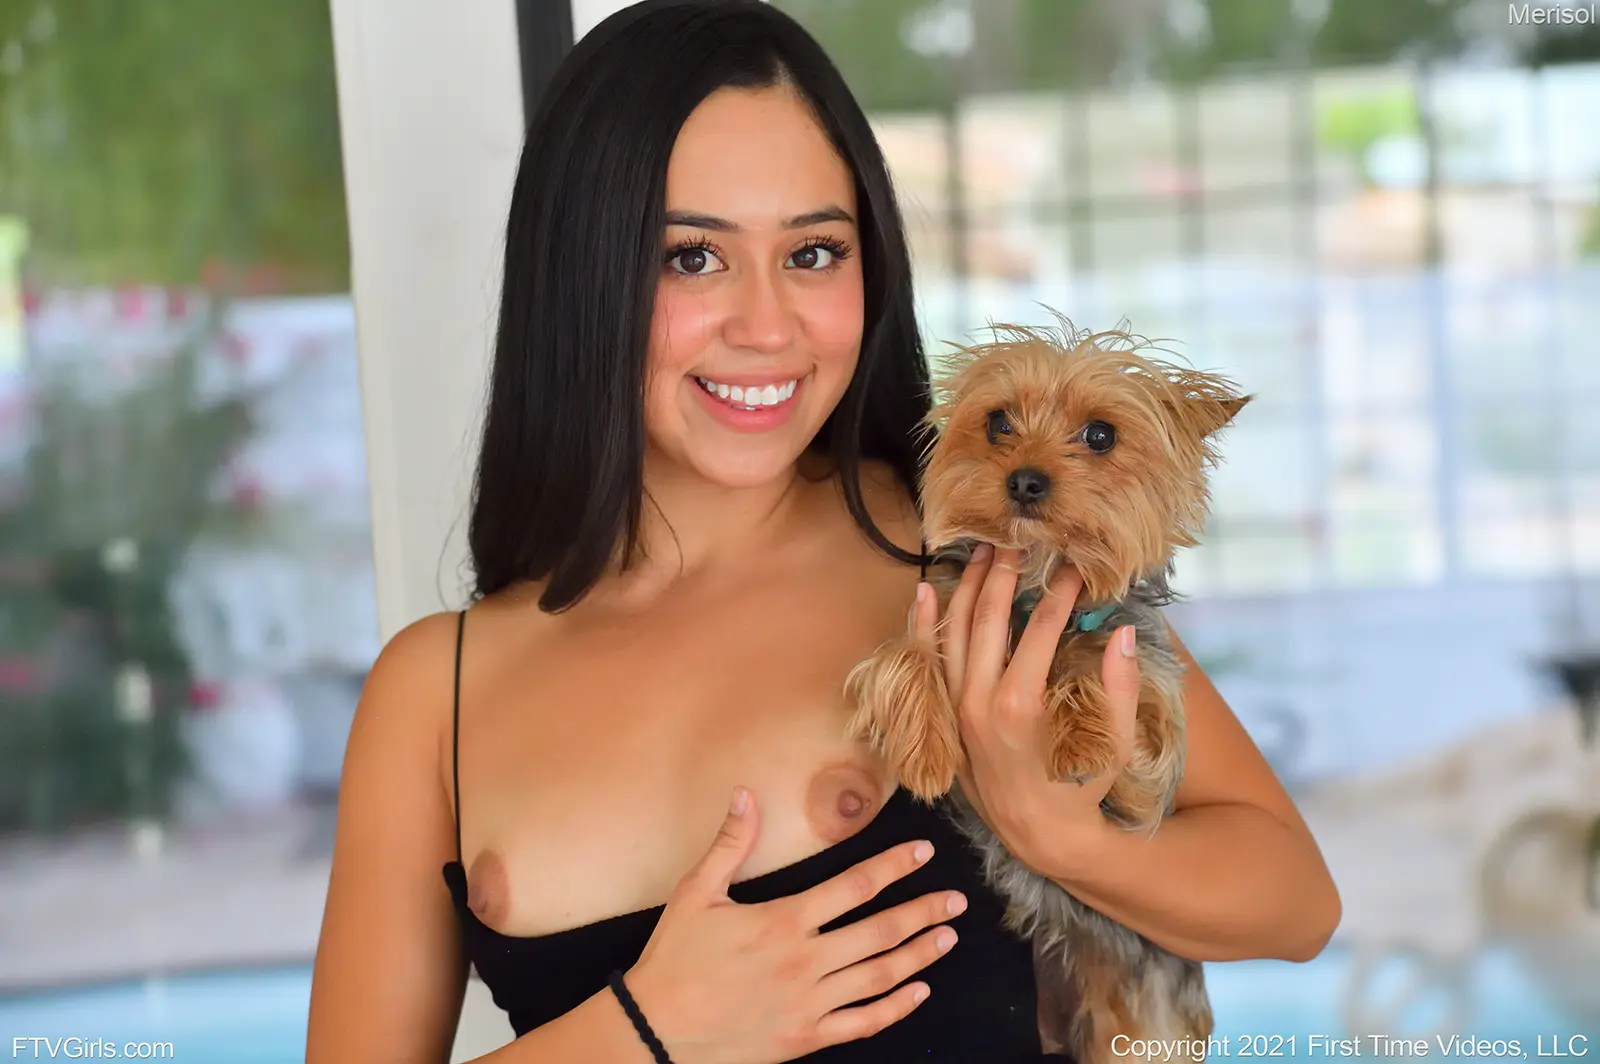 Merisol FTV is holding a beautiful dog as she hows her tits while standing near a glass door near the pool